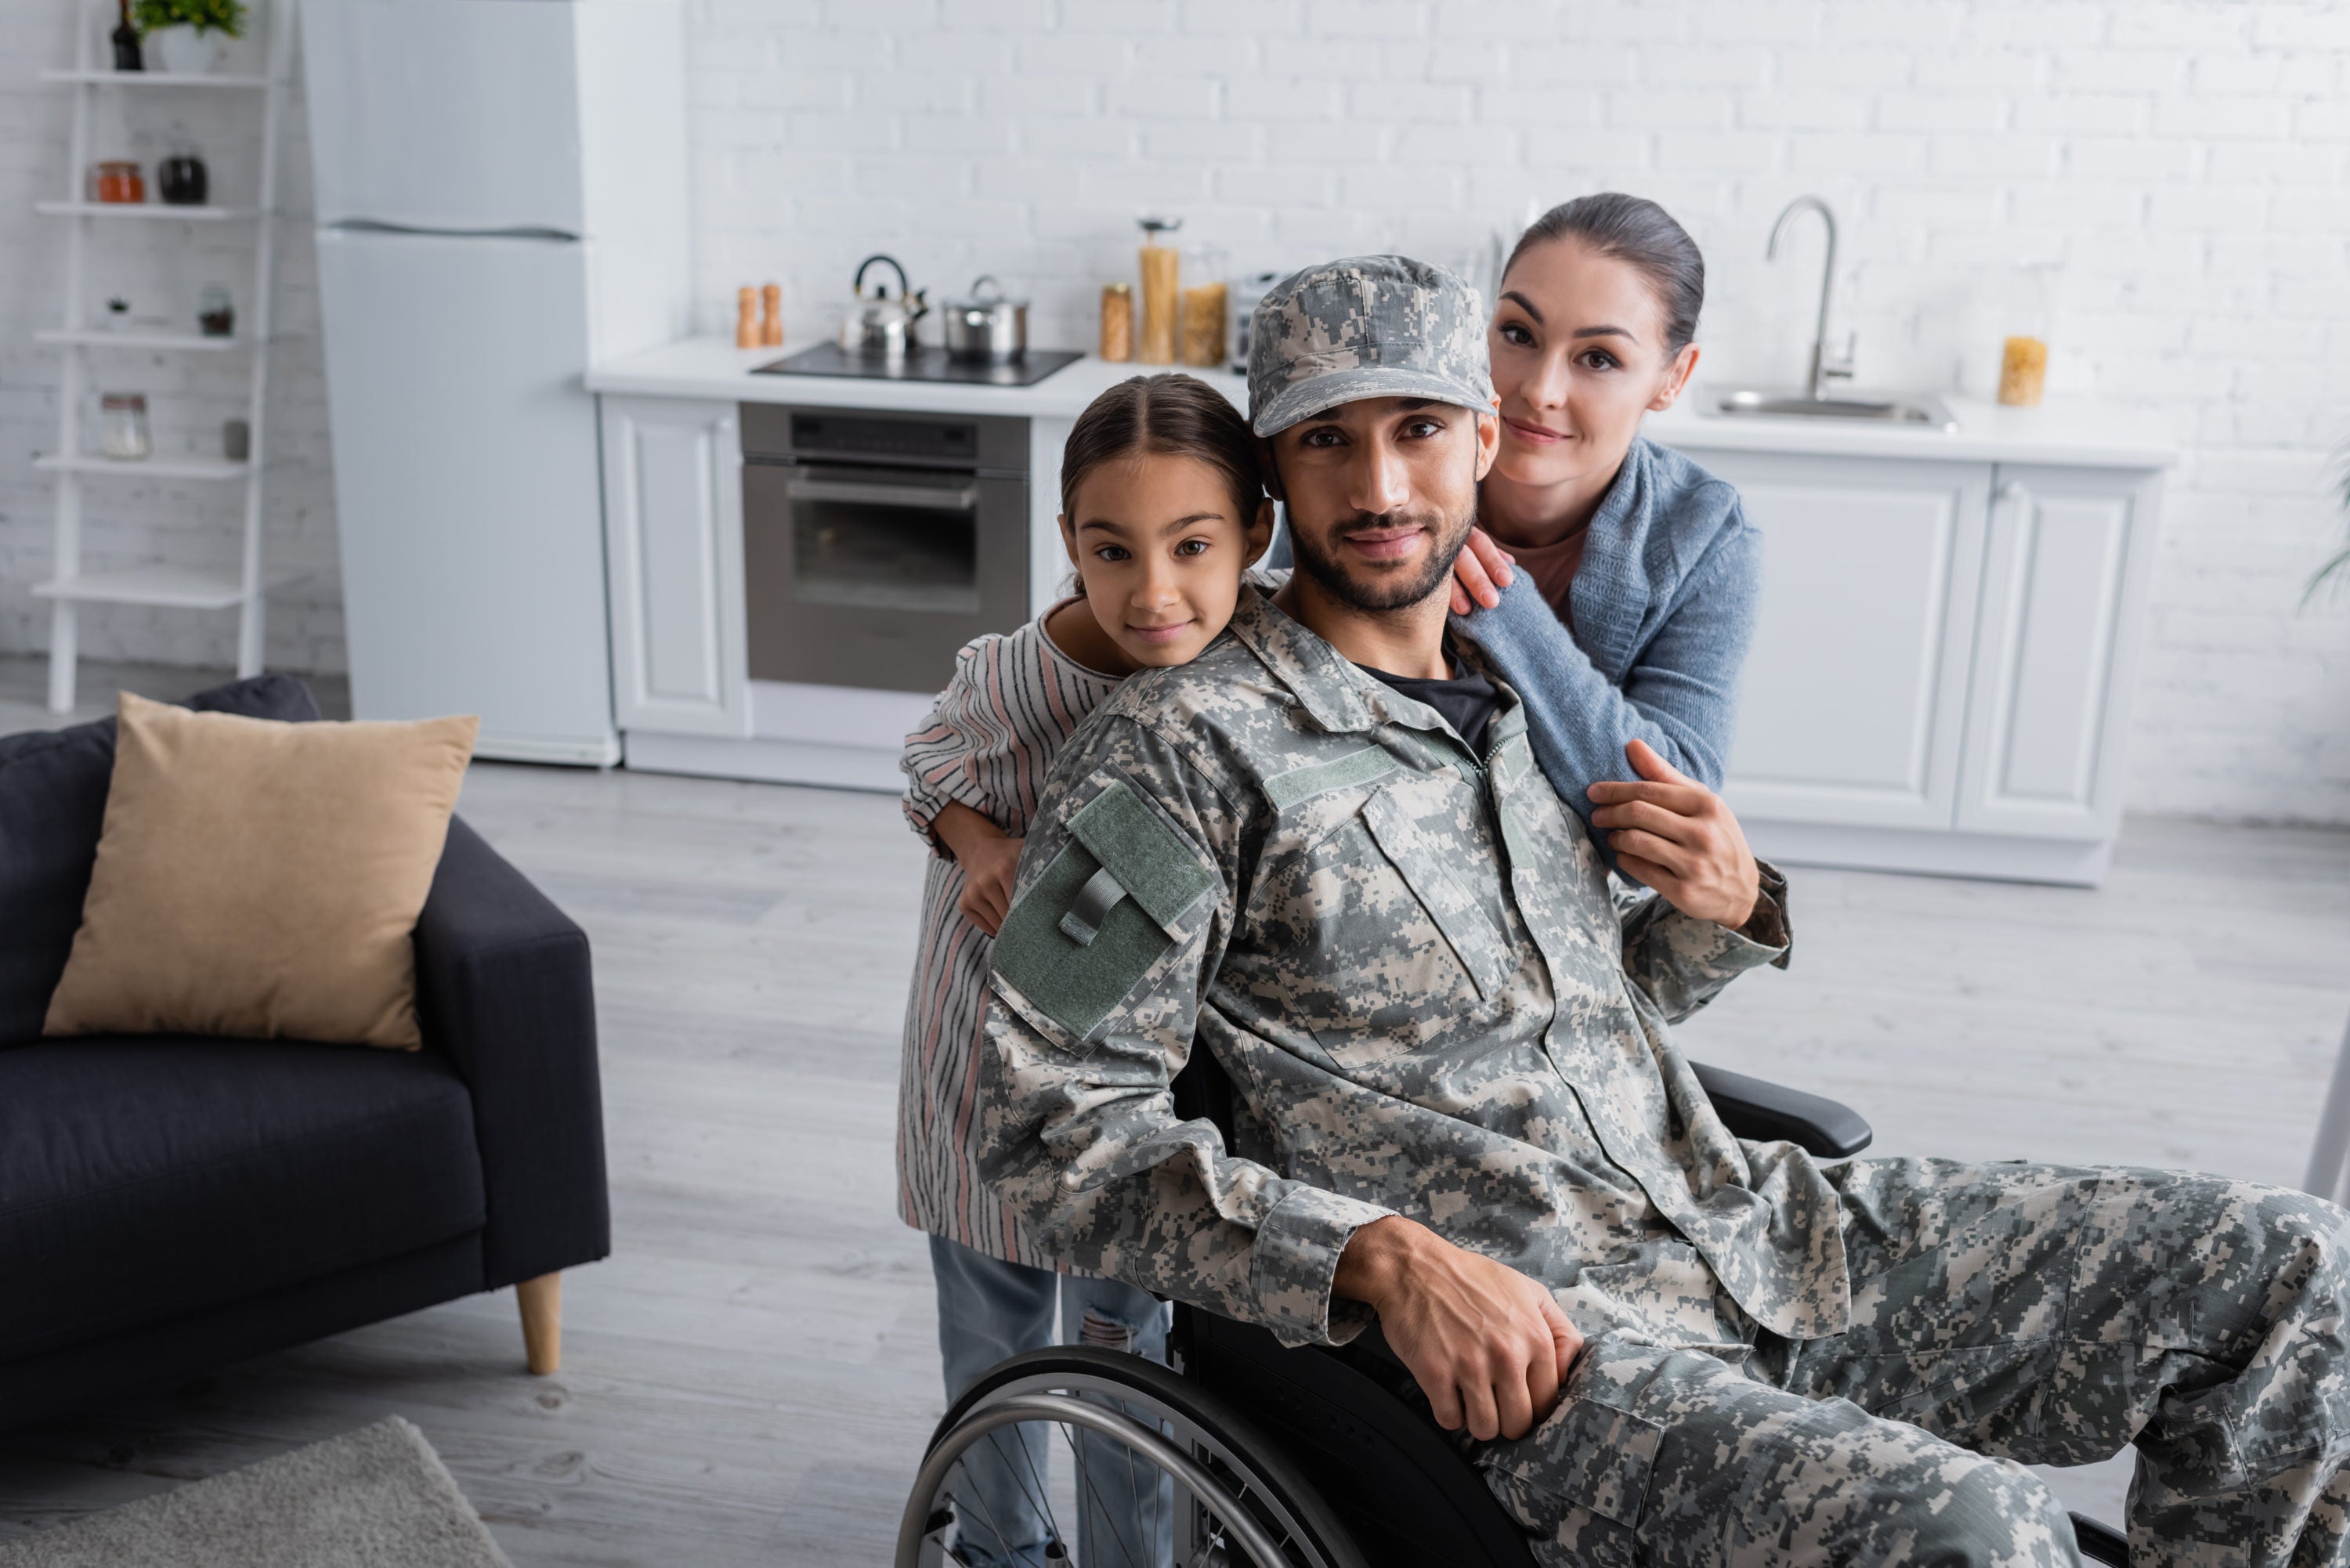 Man in military uniform and wheelchair looking at camera near family at home